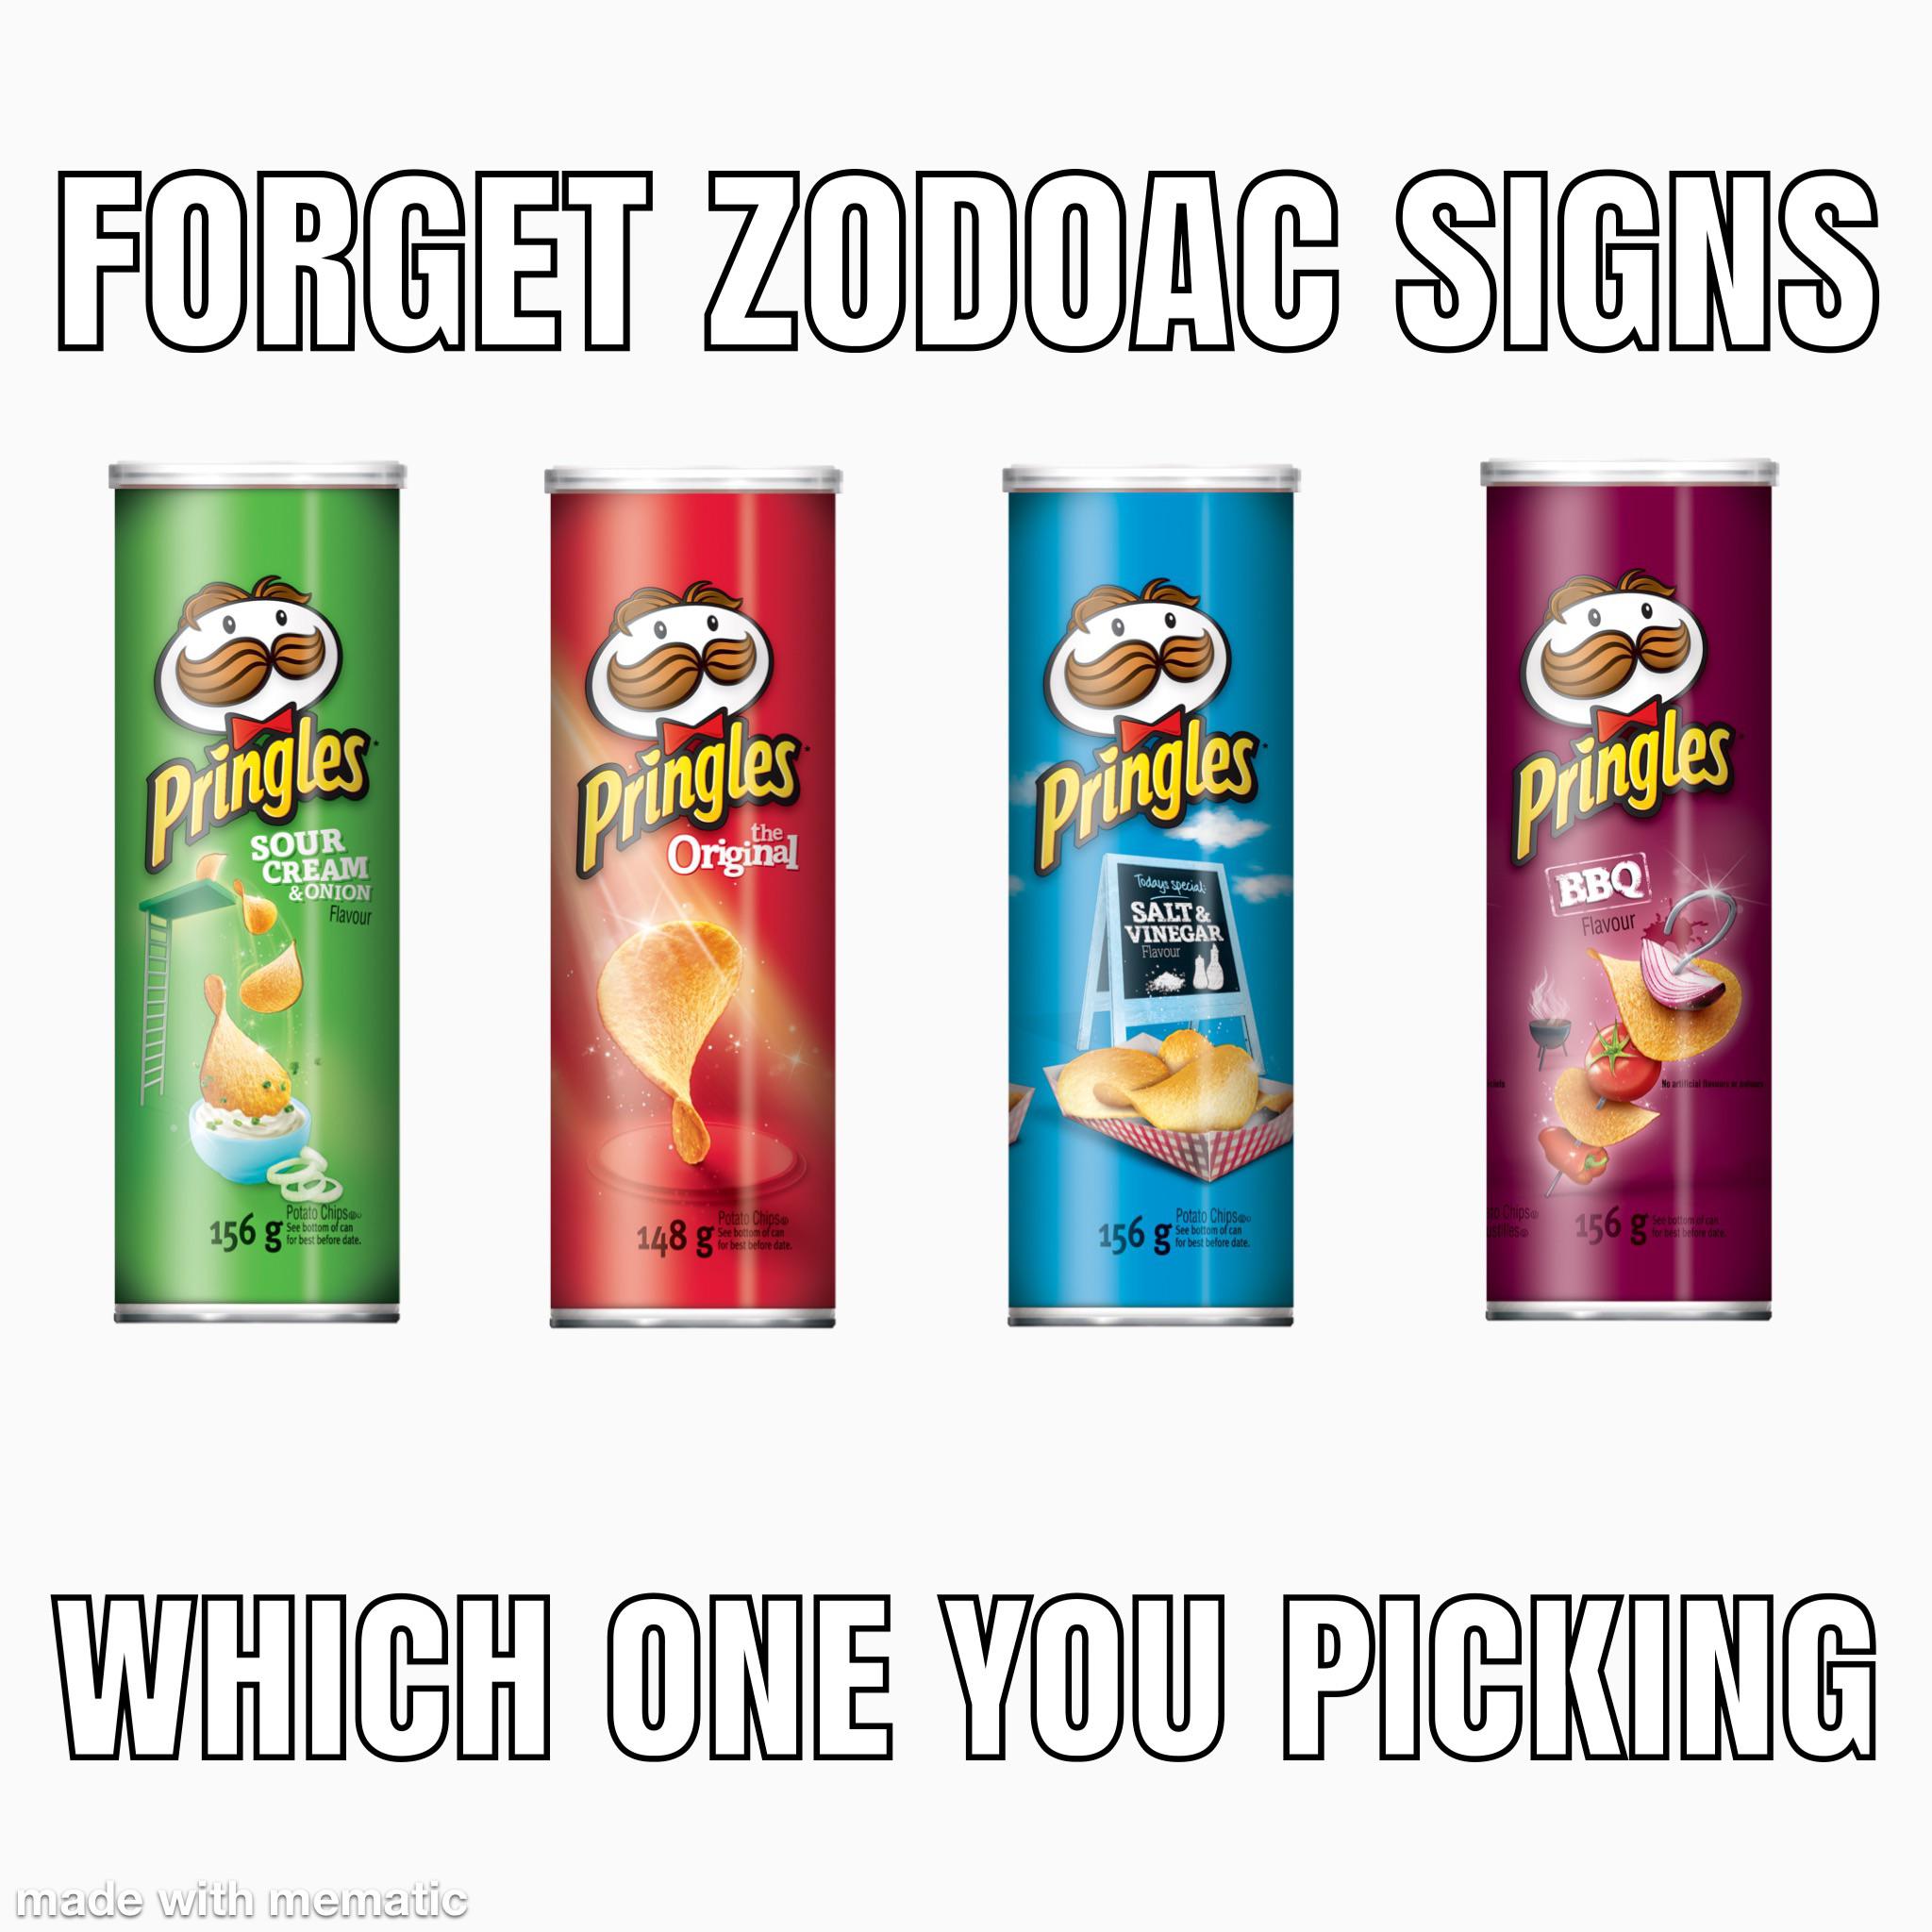 Forget Zodoac Signs Pringles Pringles Pringles Pringles the Original Sour Cream &Onion Flavour Todays special Bbq Salt & Vinegar Flavour Flavour No articles 156 g Potato Chips See bottom of can for best before date. 148 g Potato Chipse See bottom of can…